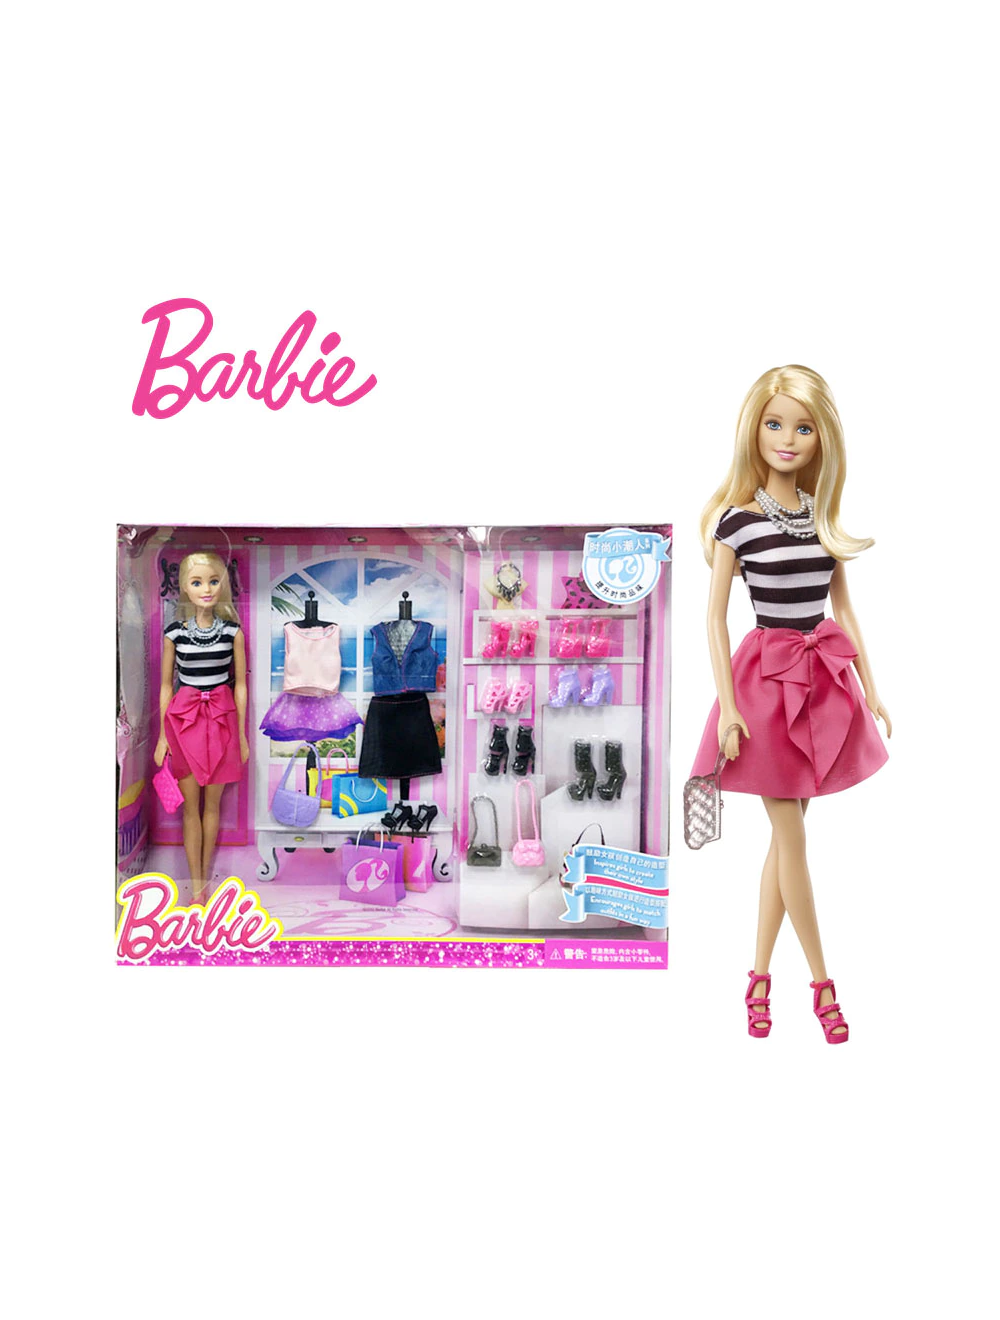 Barbie Fashions And Accessories